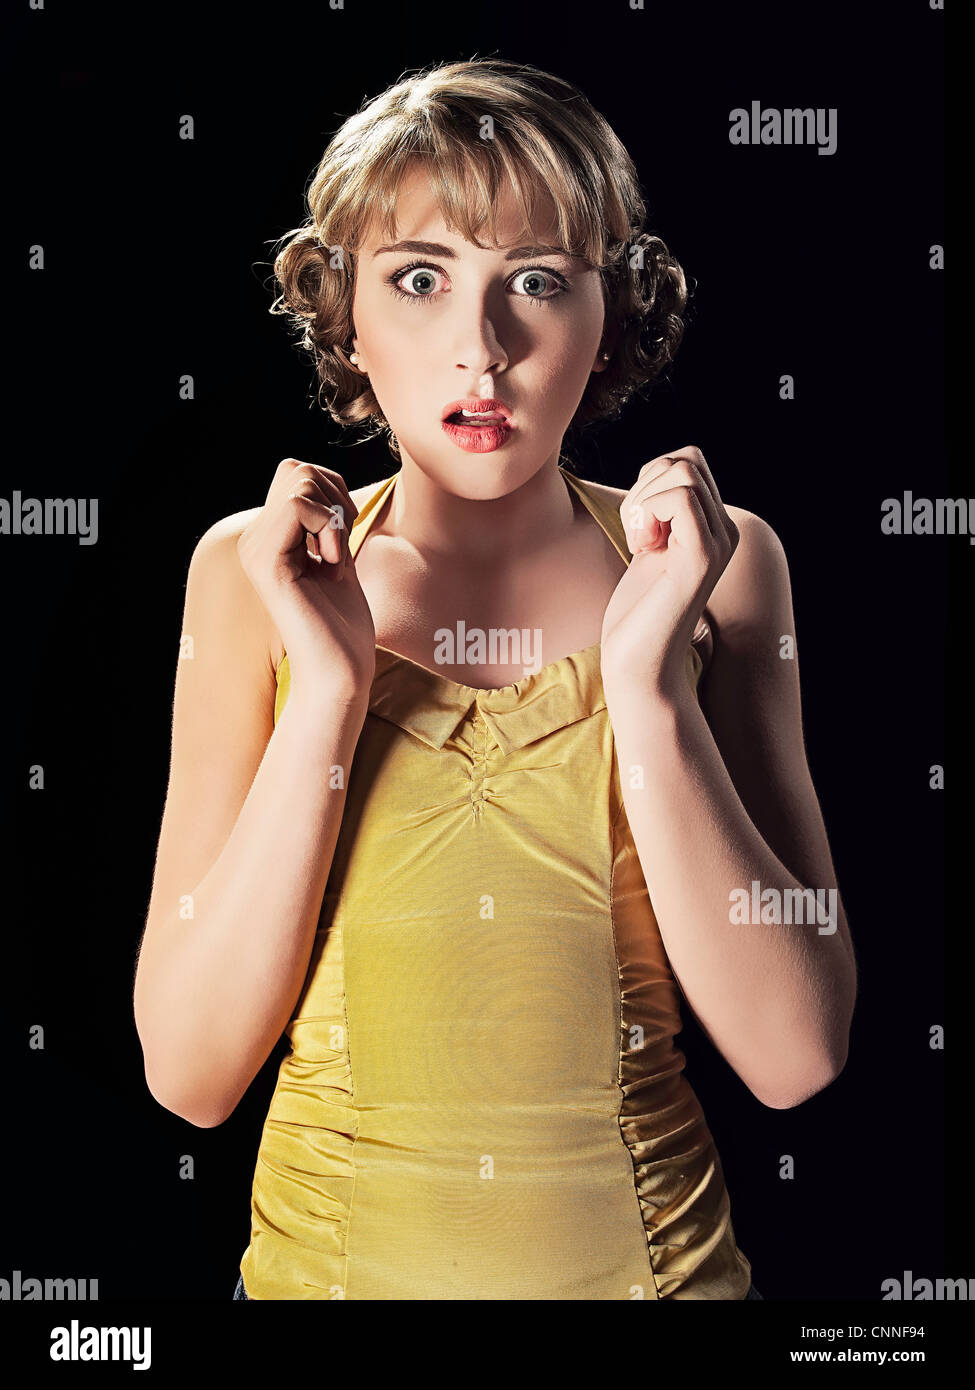 Frightened girl gasping Stock Photo